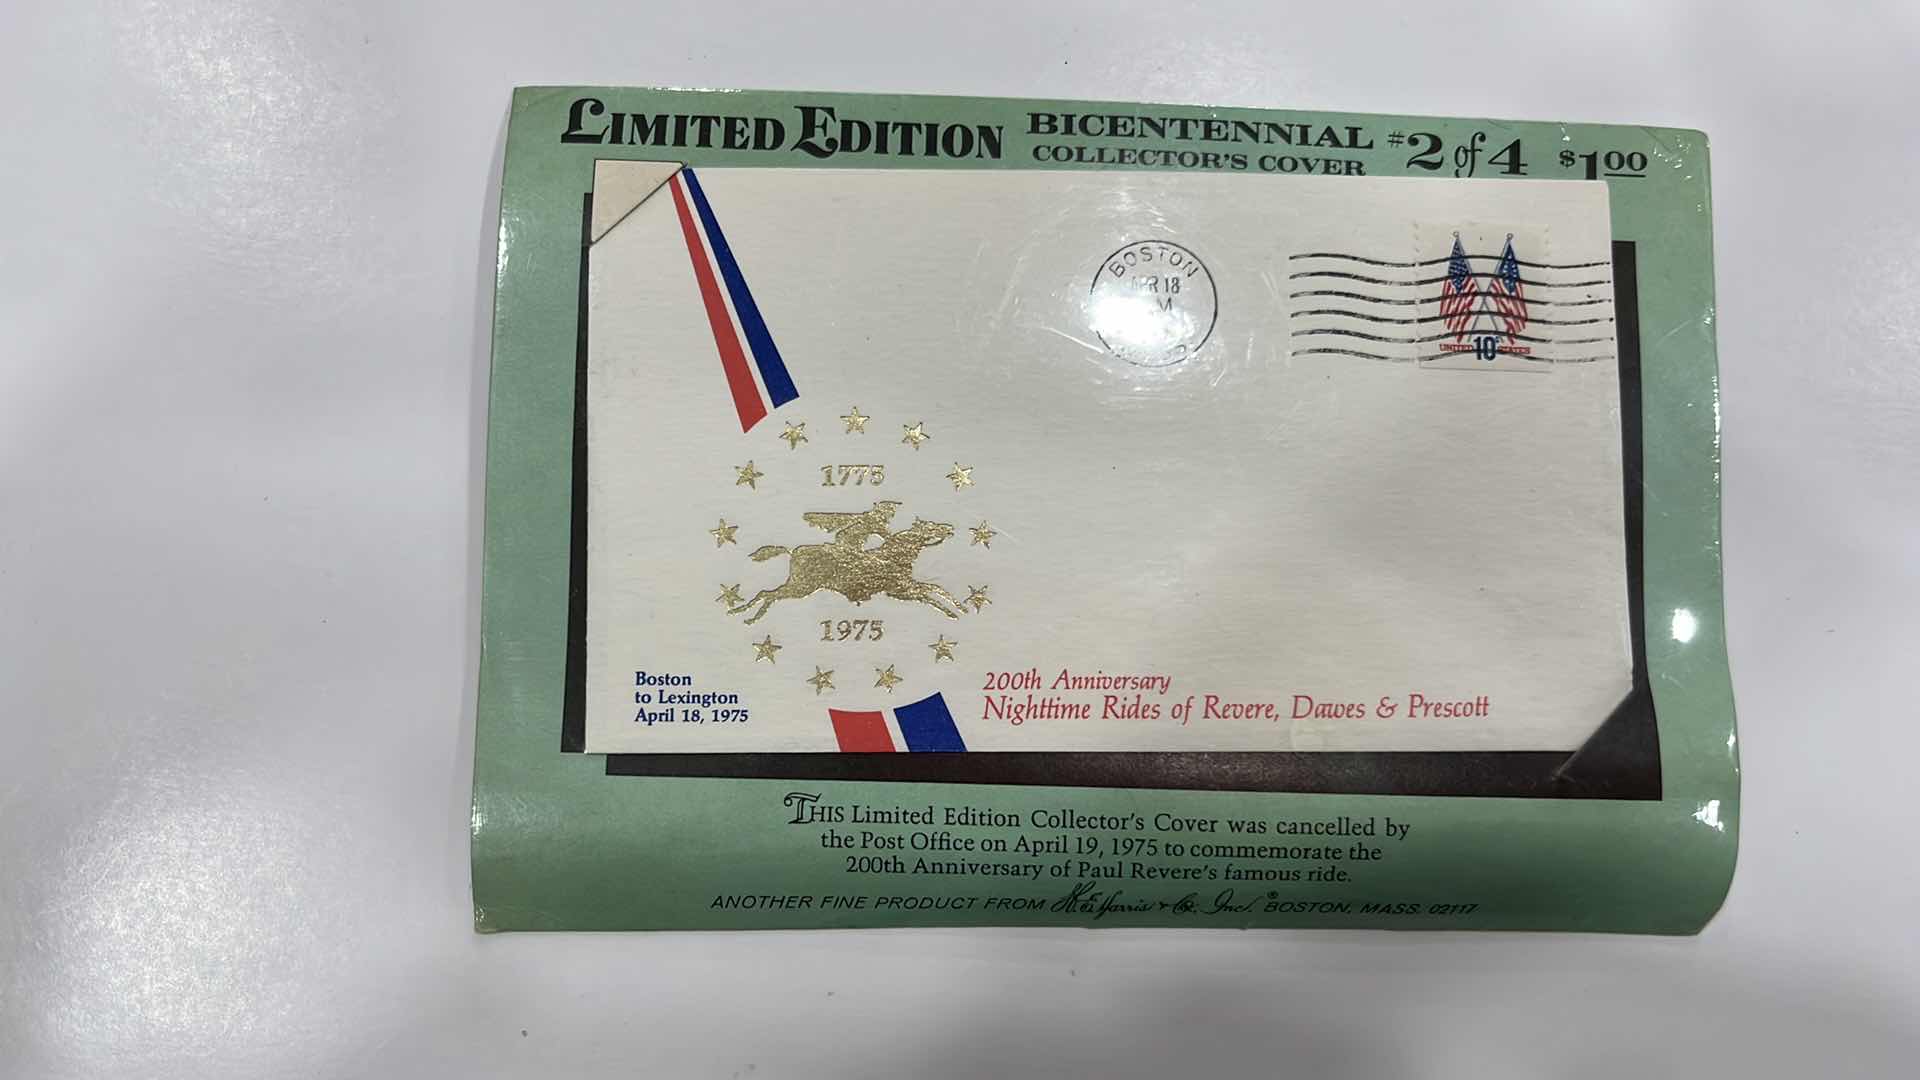 Photo 2 of H. E. HARRIS 1075 LIMITED EDITION BICENTENNIAL COLLECTOR’S COVER 200TH ANNIVERSARY NIGHTTIME RIDES OF REVERE, DAWES & PRESCOTT